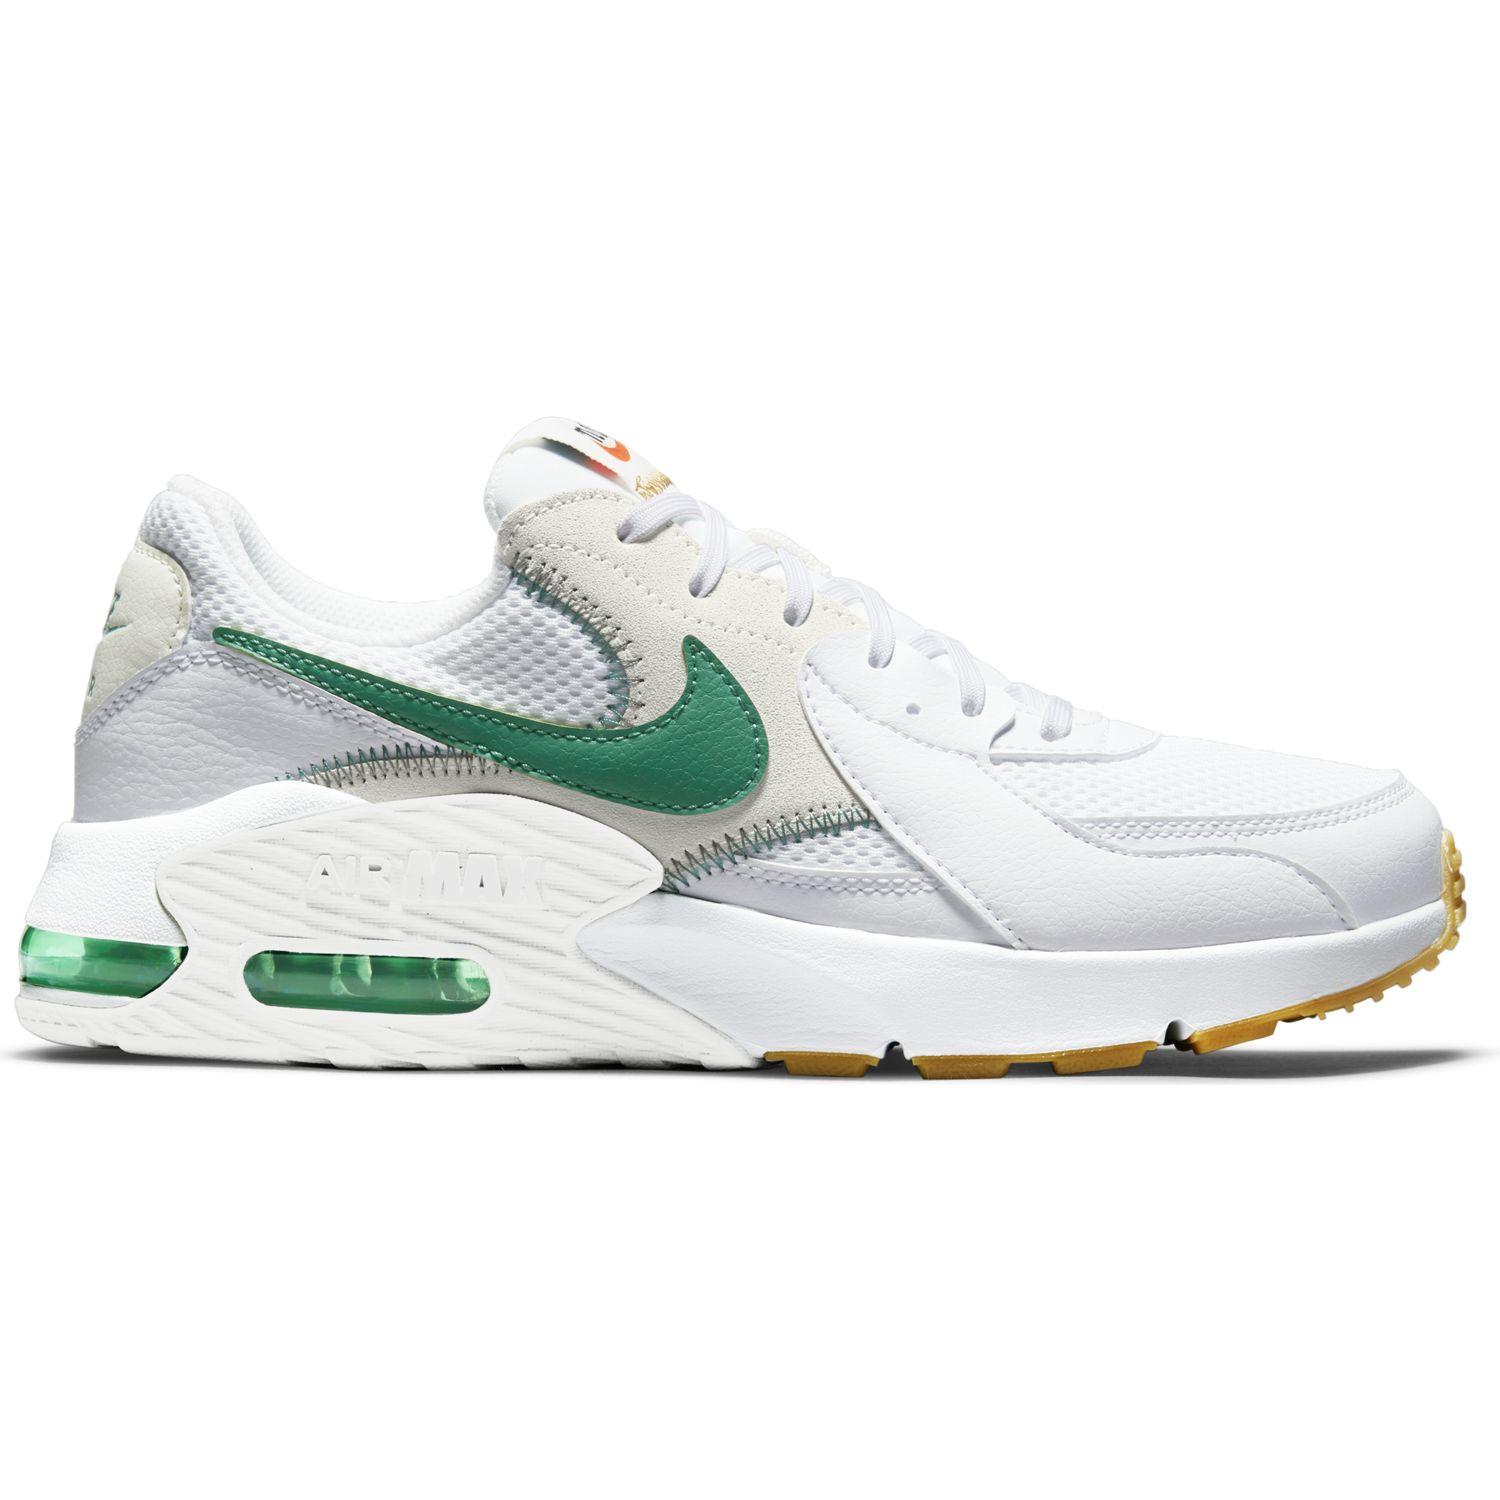 NIKE】WMNS AIR MAX EXCEE|ABC-MART(エービーシー・マート)の通販 